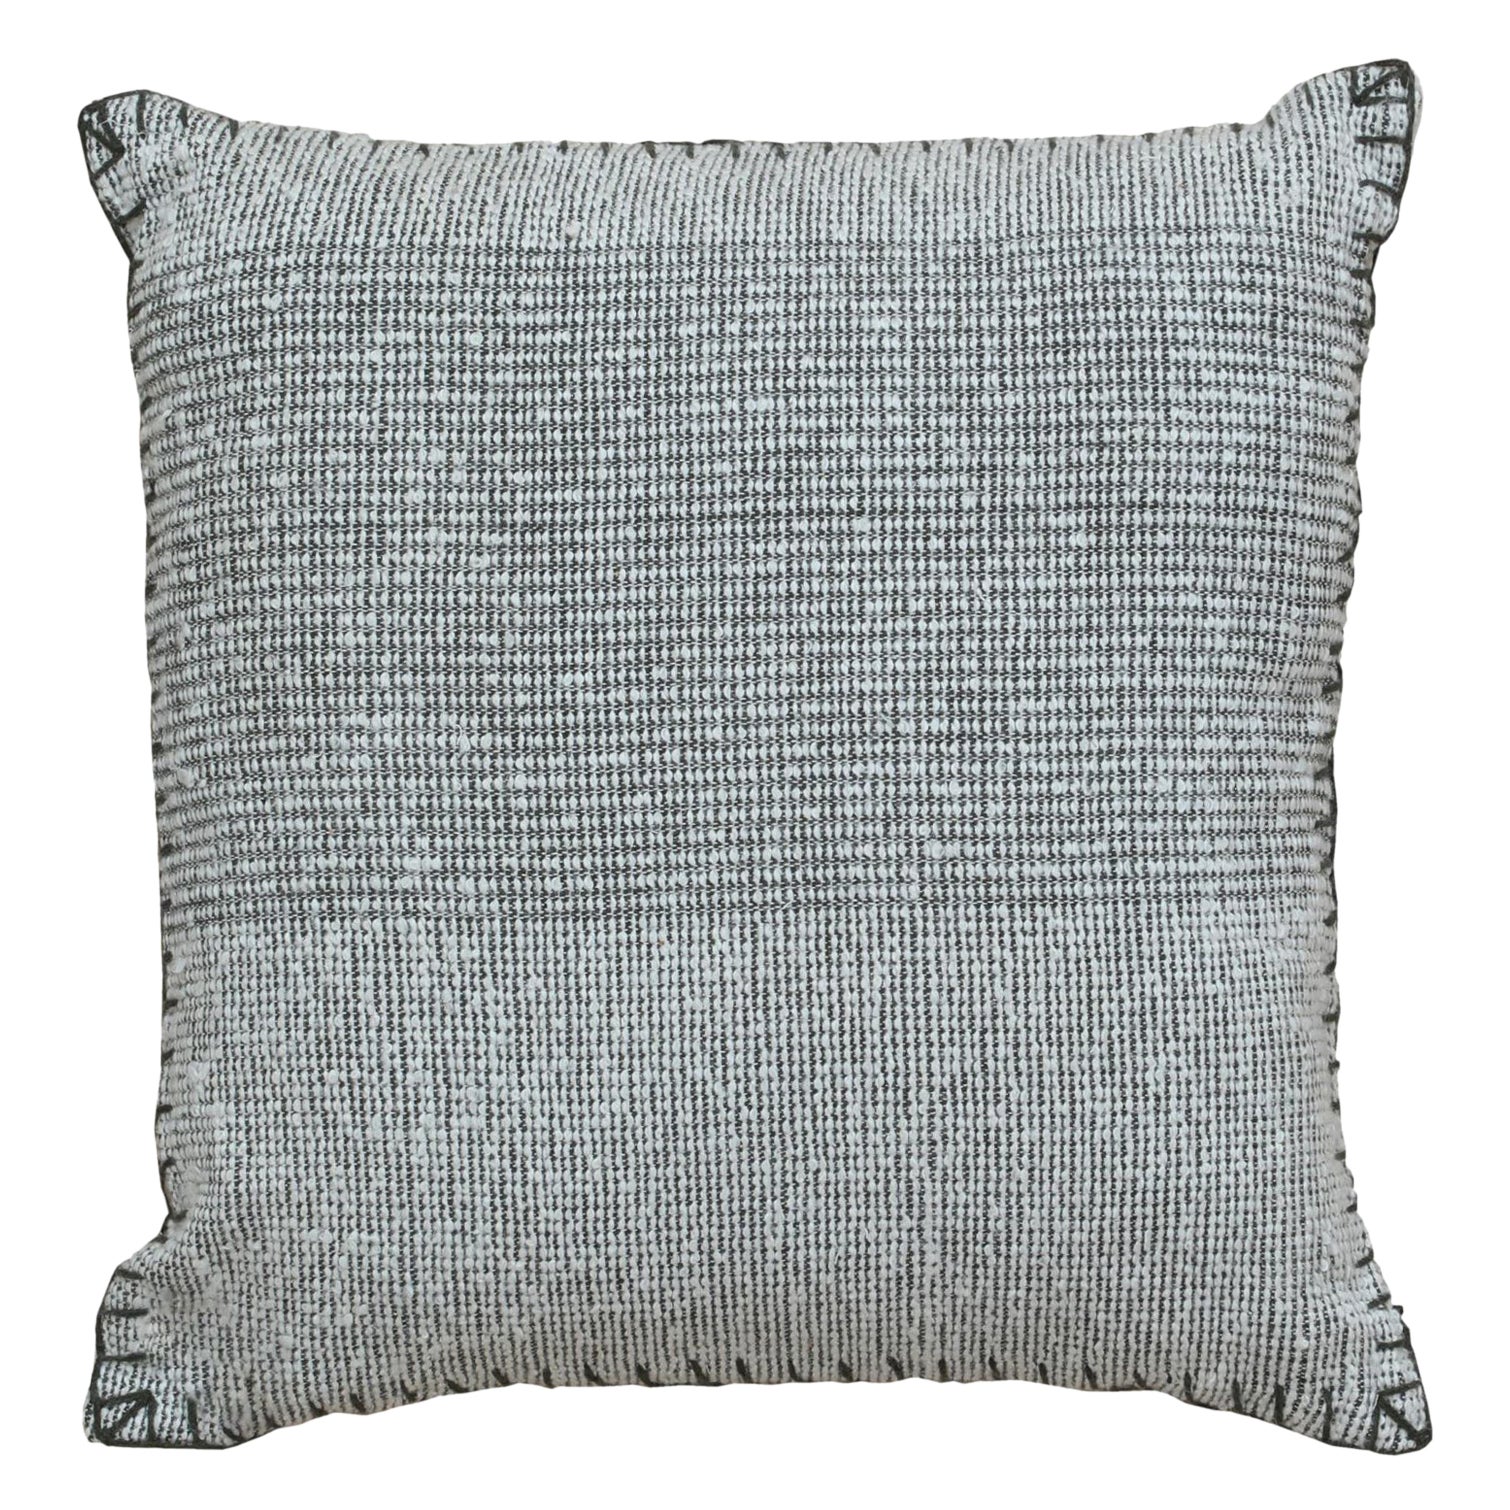 Contemporary Boho Chic Wool and Cotton Pillow In Gray For Sale